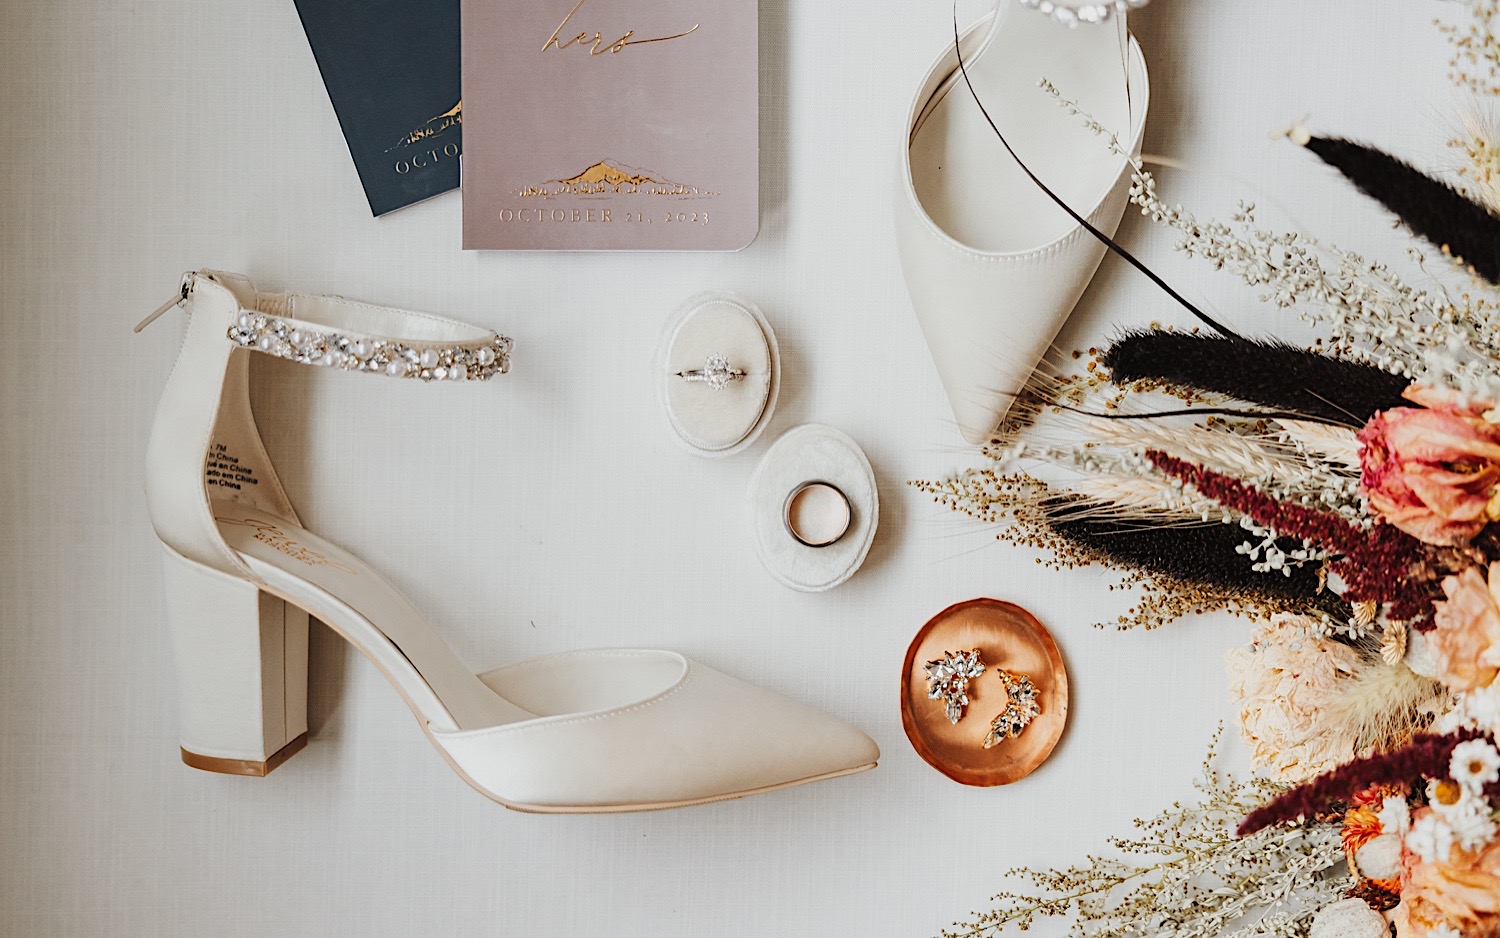 A wedding day flatlay consisting of shoes, vows, earrings, wedding rings, and a bouquet